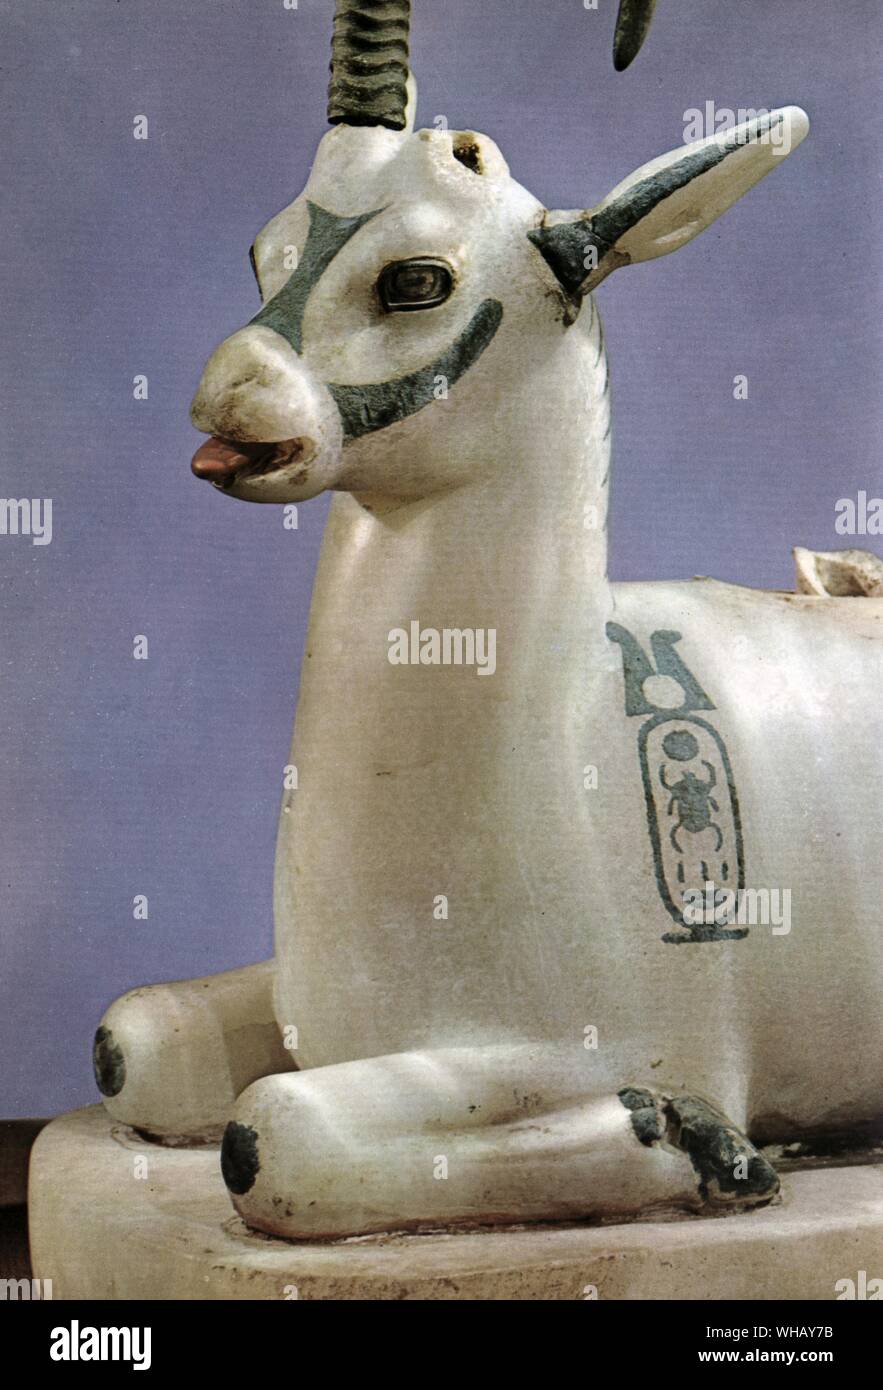 Unguent jar in the form of an ibex. Inlaid alabaster. The remaining horn is natural. Tukankhamen, by Christiane Desroches Noblecourt, page 213. Stock Photo